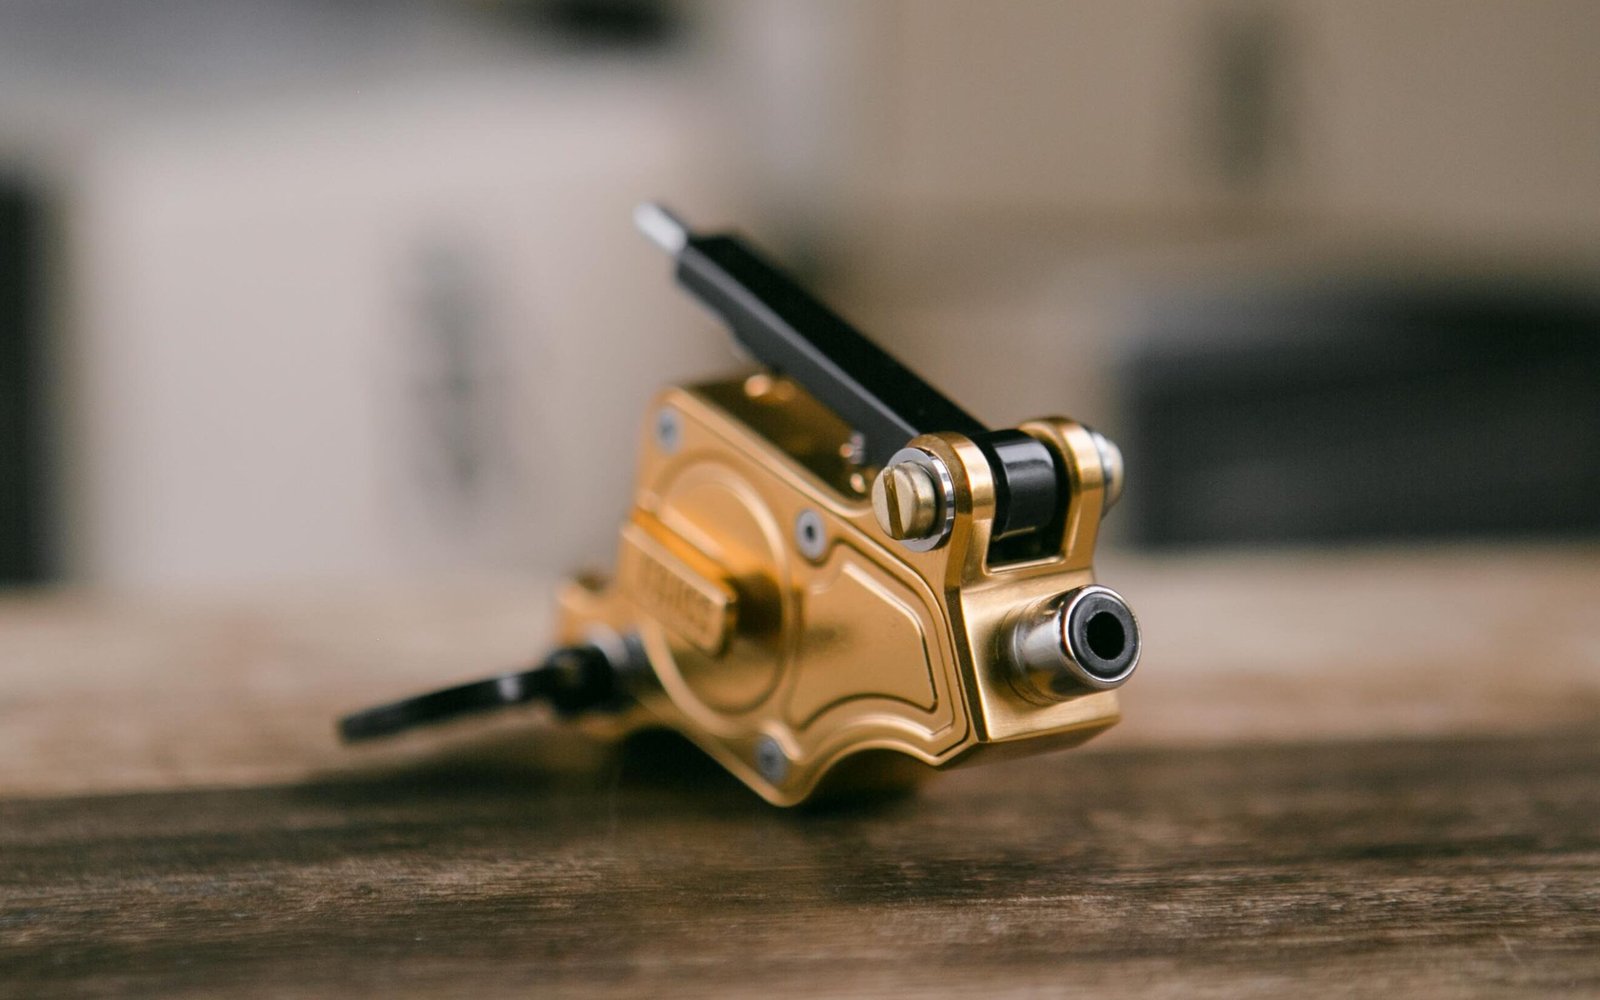 Want The Best Rotary Tattoo Machine? Check Out These Top 5 Picks